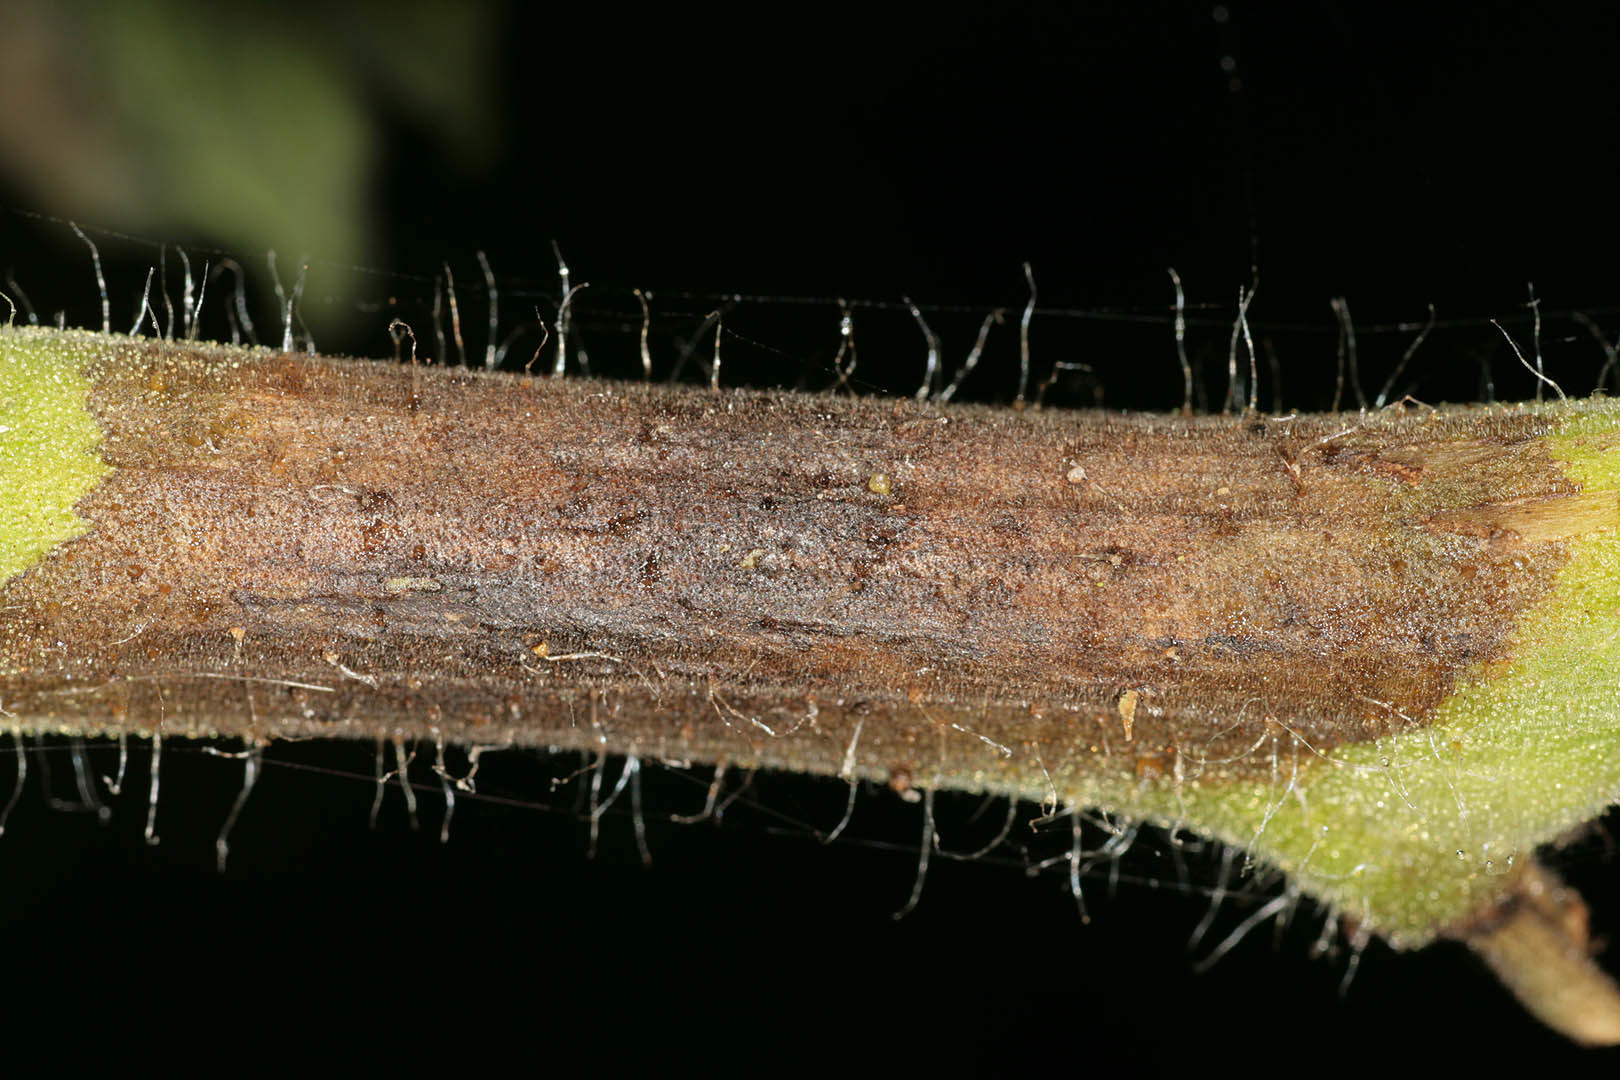 Image of Phytophthora infestans